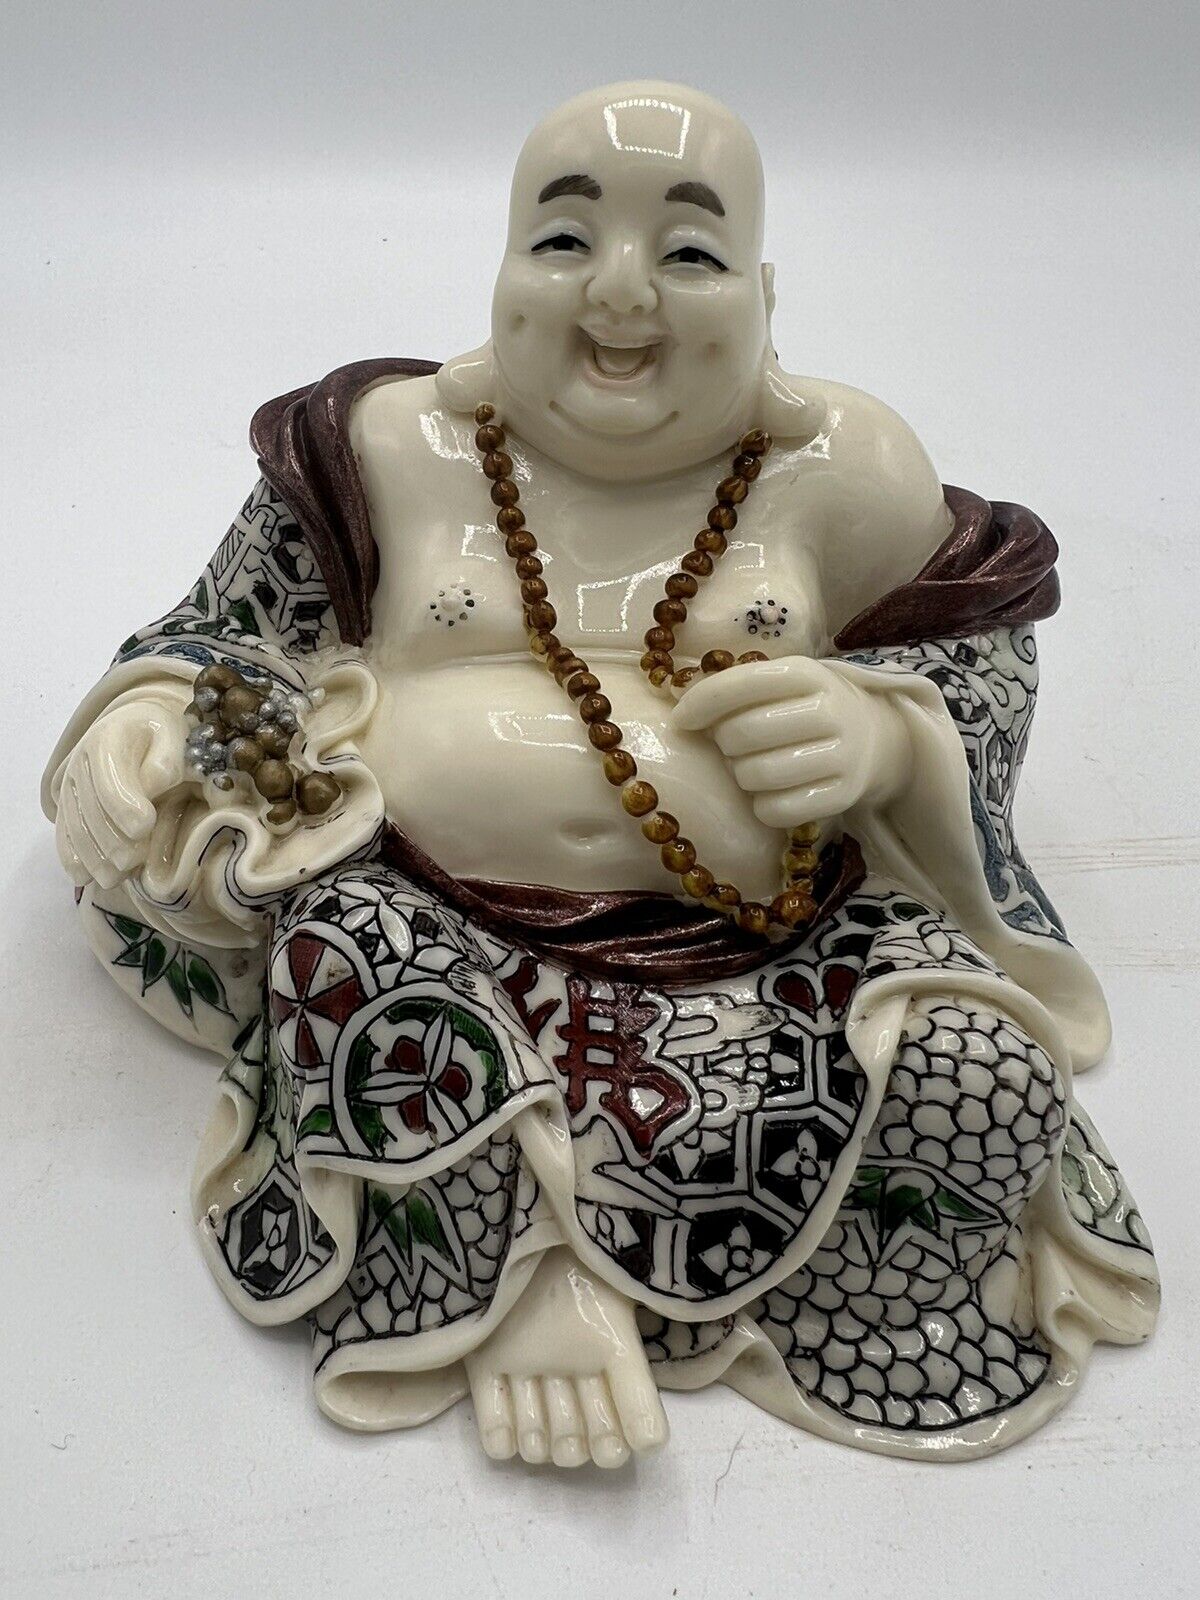 Vintage/antique Porcelain Chinese Laughing Buddha Sculpture SIGNED